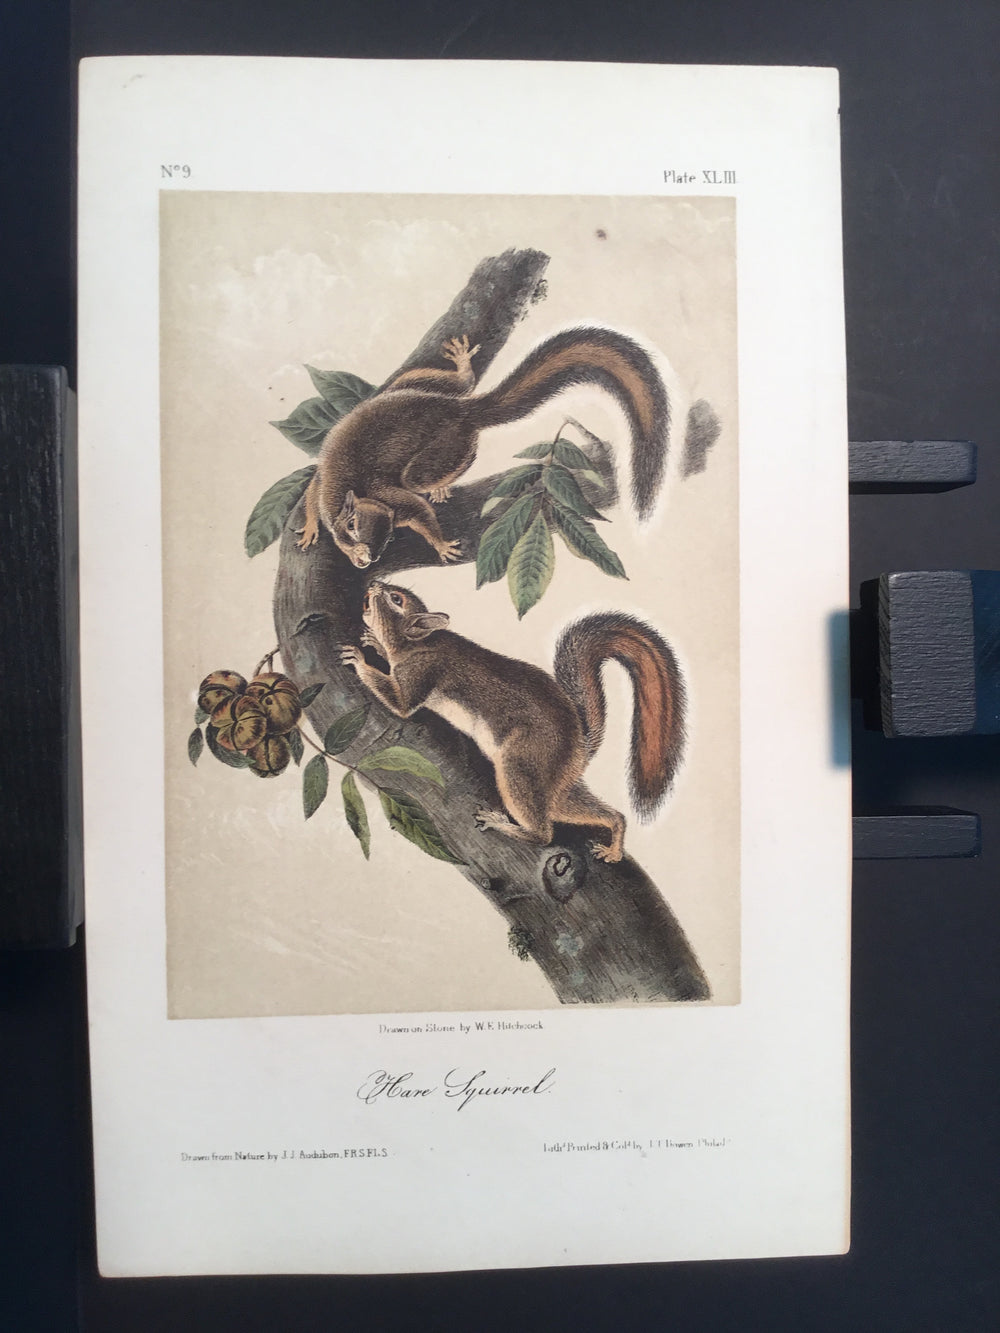 Lord-Hopkins Collection - Hare Squirrel